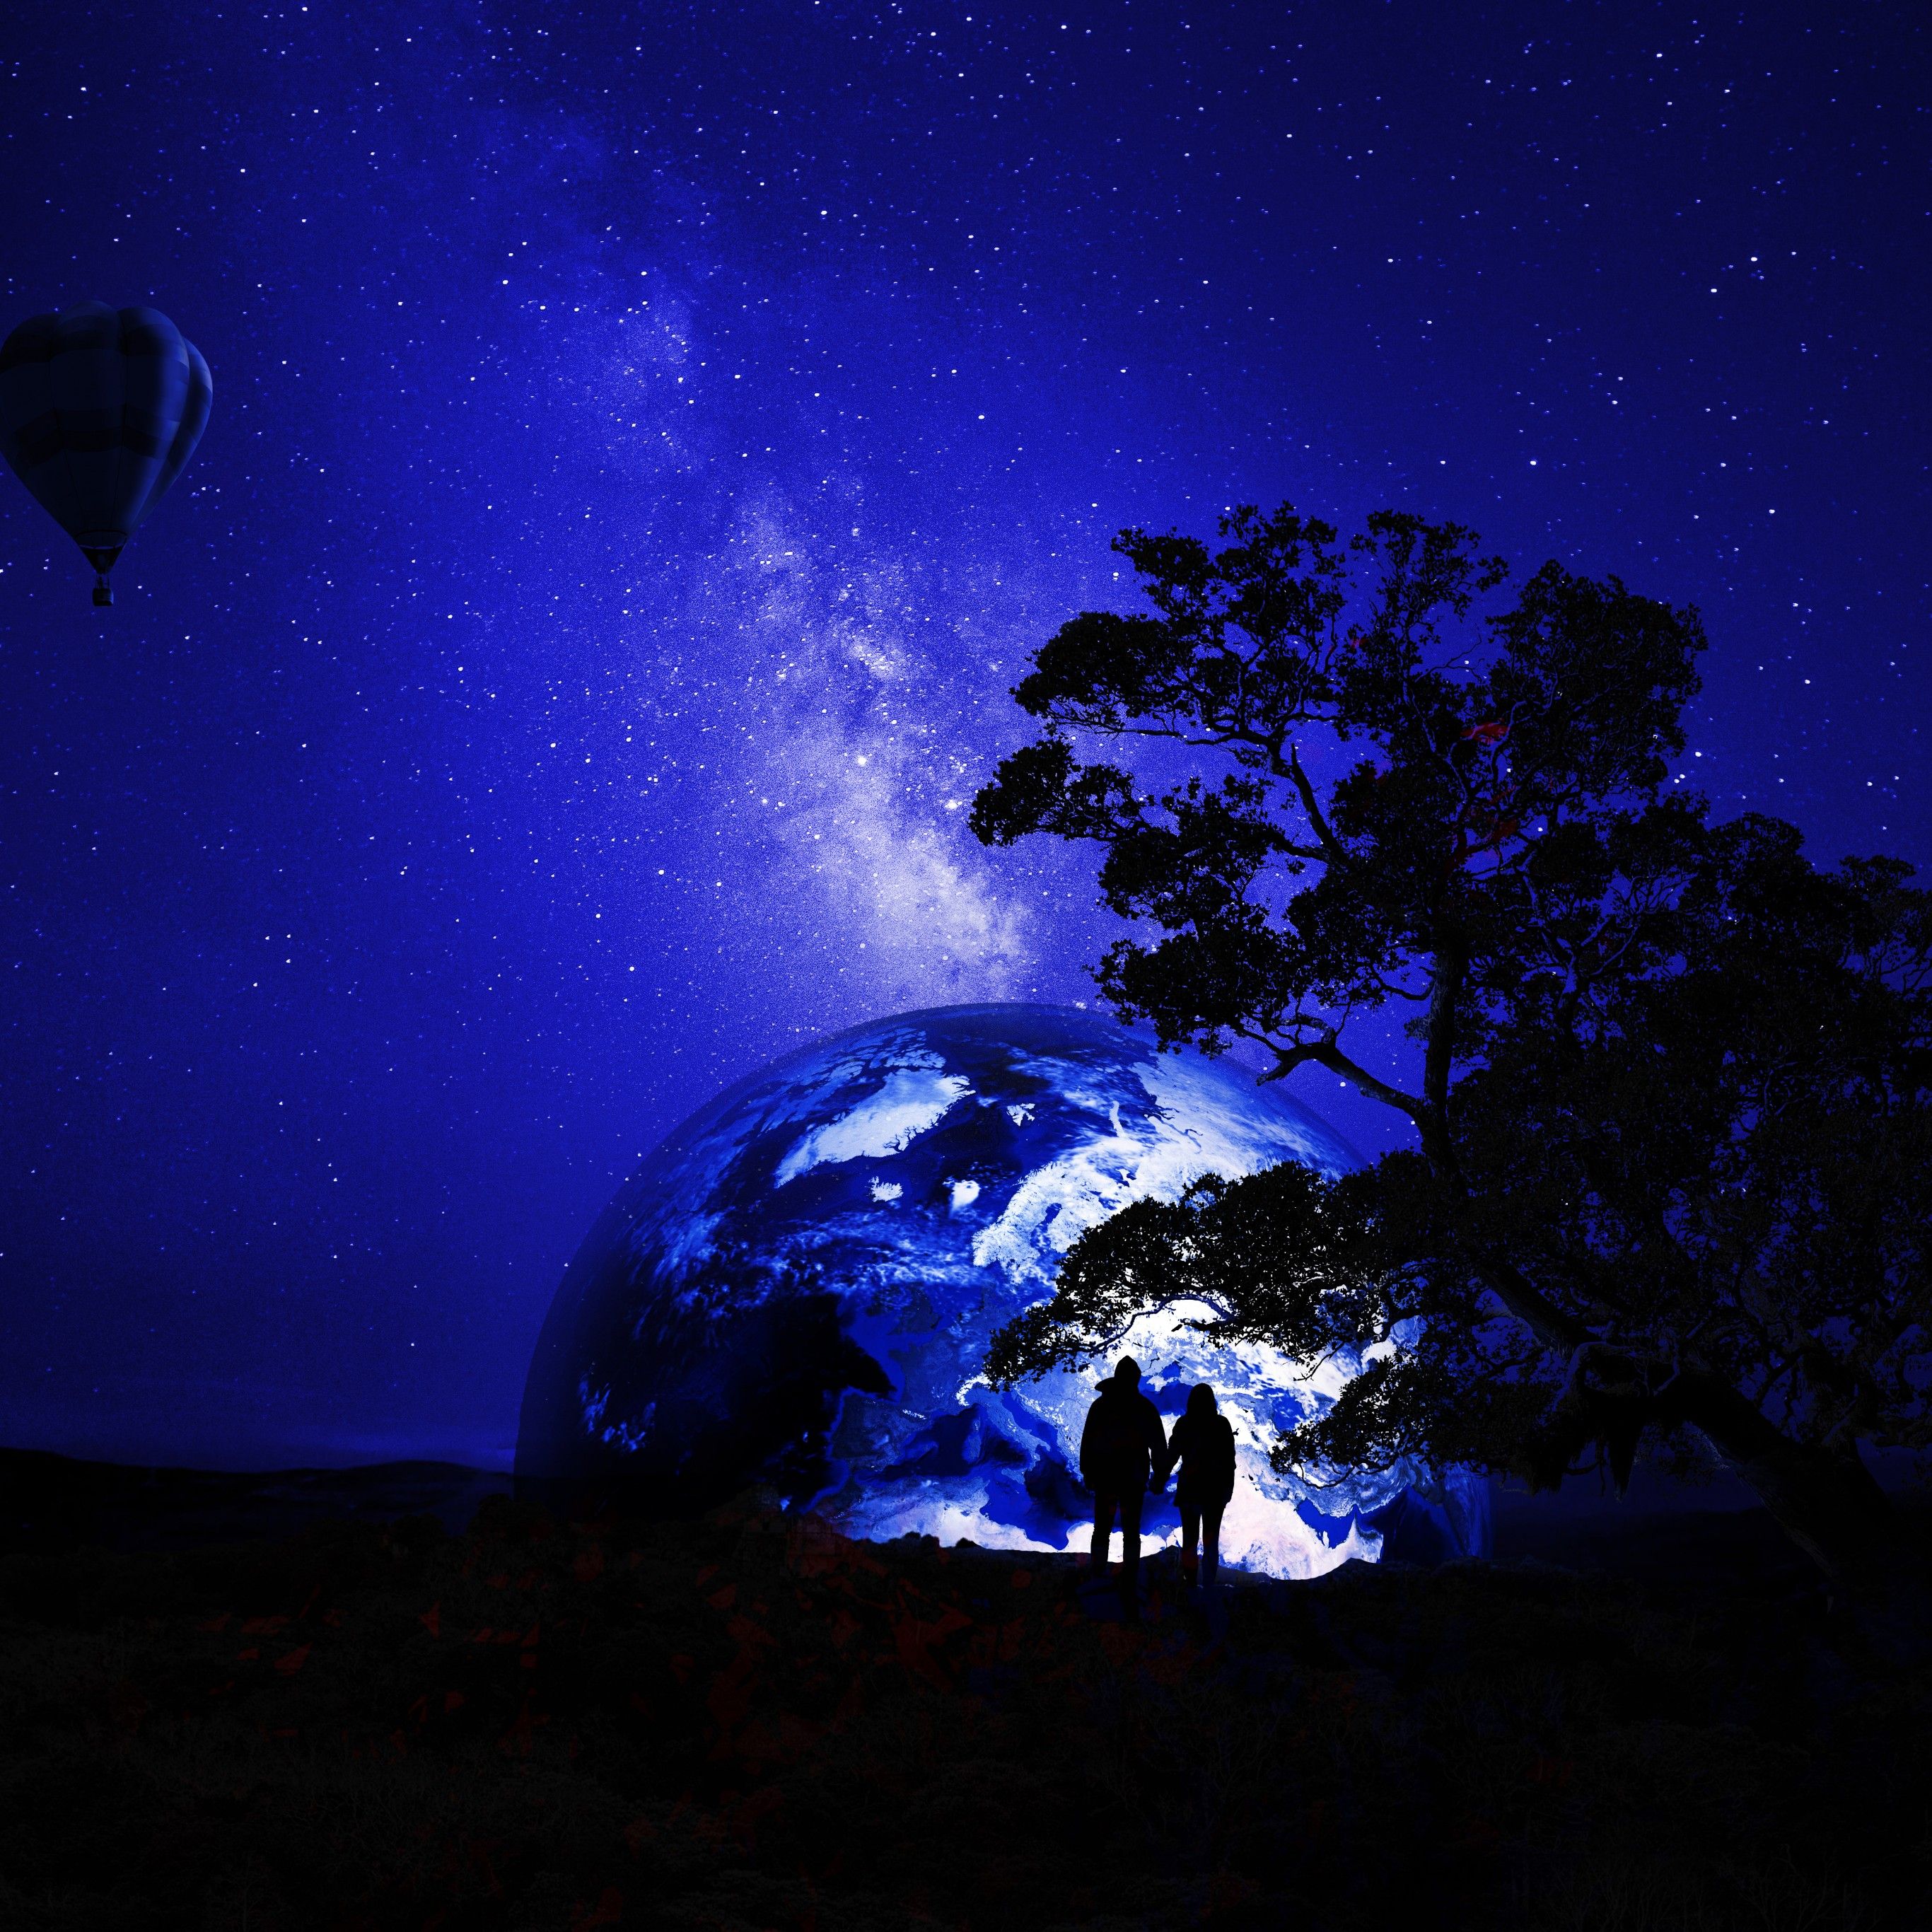 Couple 4K Wallpaper, Dream, Earth, Night, Silhouette, Together, Romantic, Starry sky, Fantasy